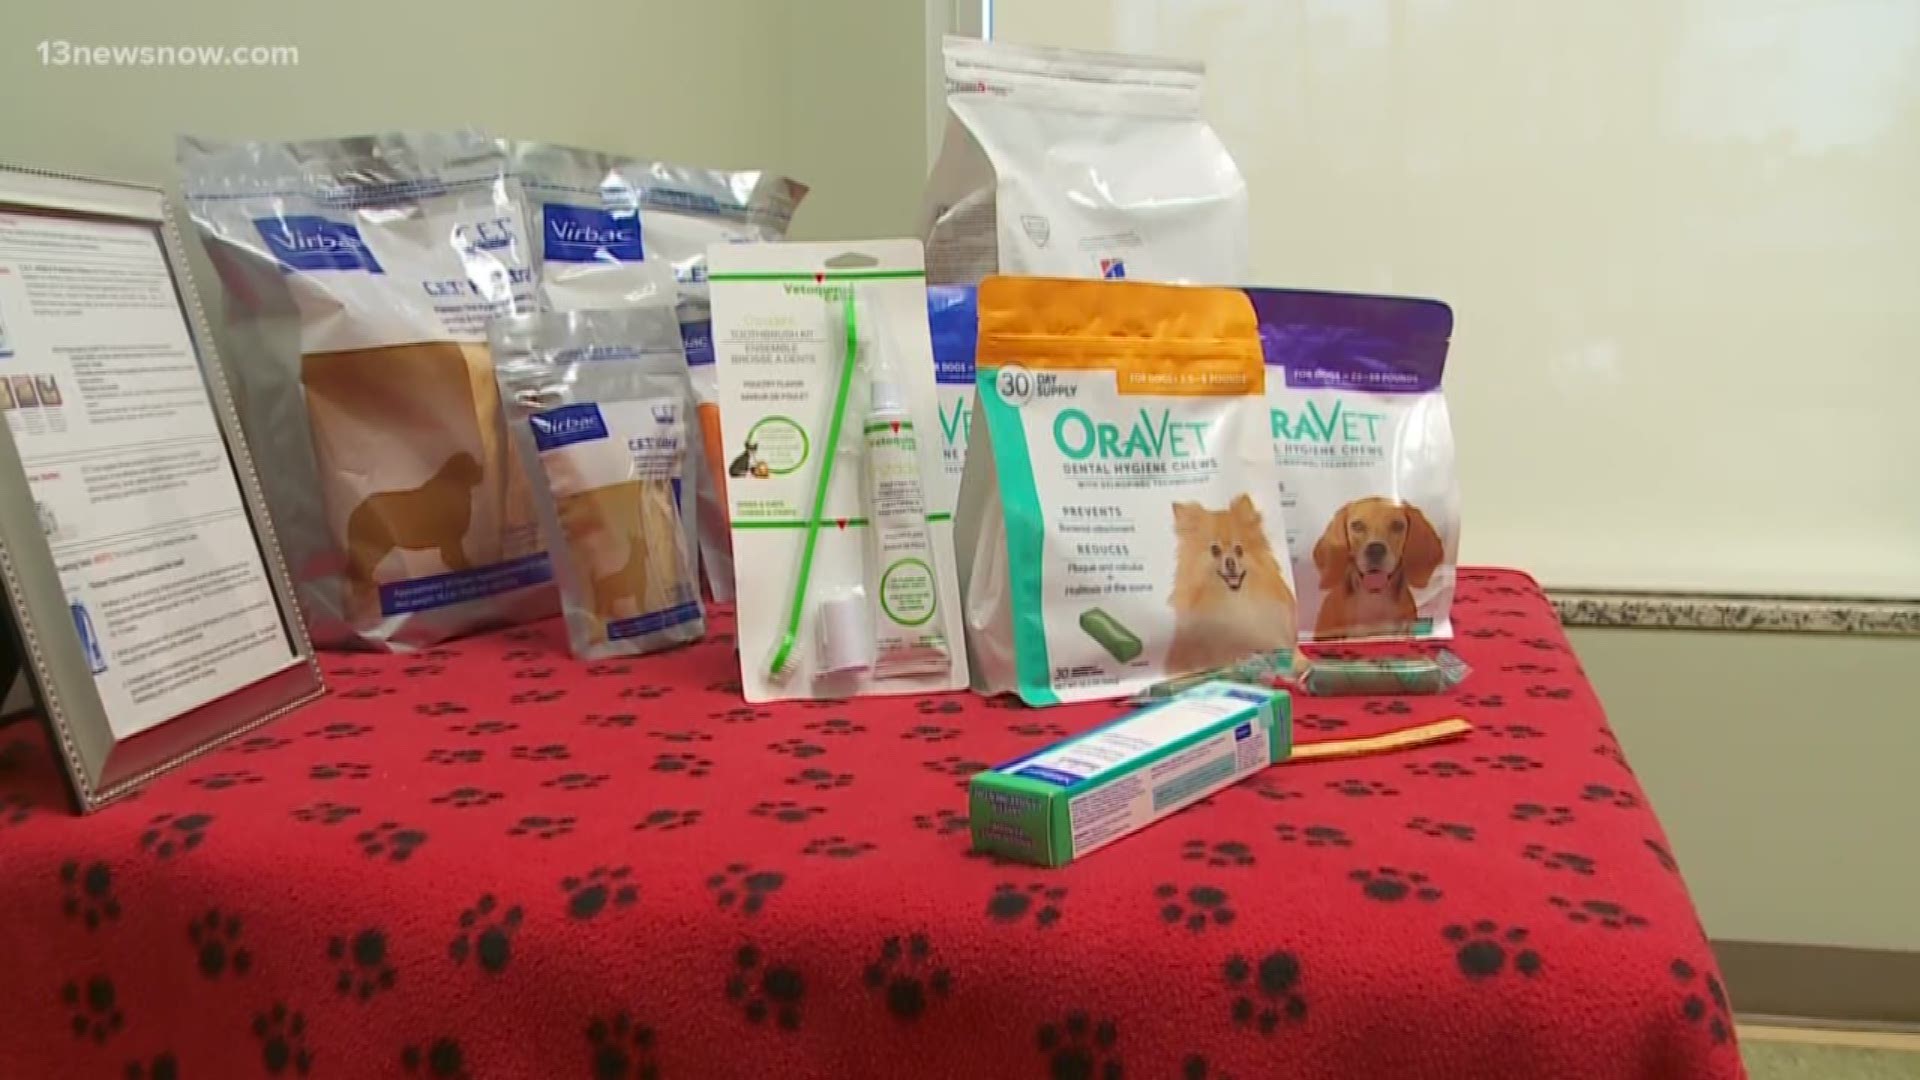 "The American Veterinary Dental Association recommends brushing your dog's teeth every day," Nadeen from Care-A-Lot said. She knows that can be hard so she aims for twice a week. She also provided some other tips, like making it fun.